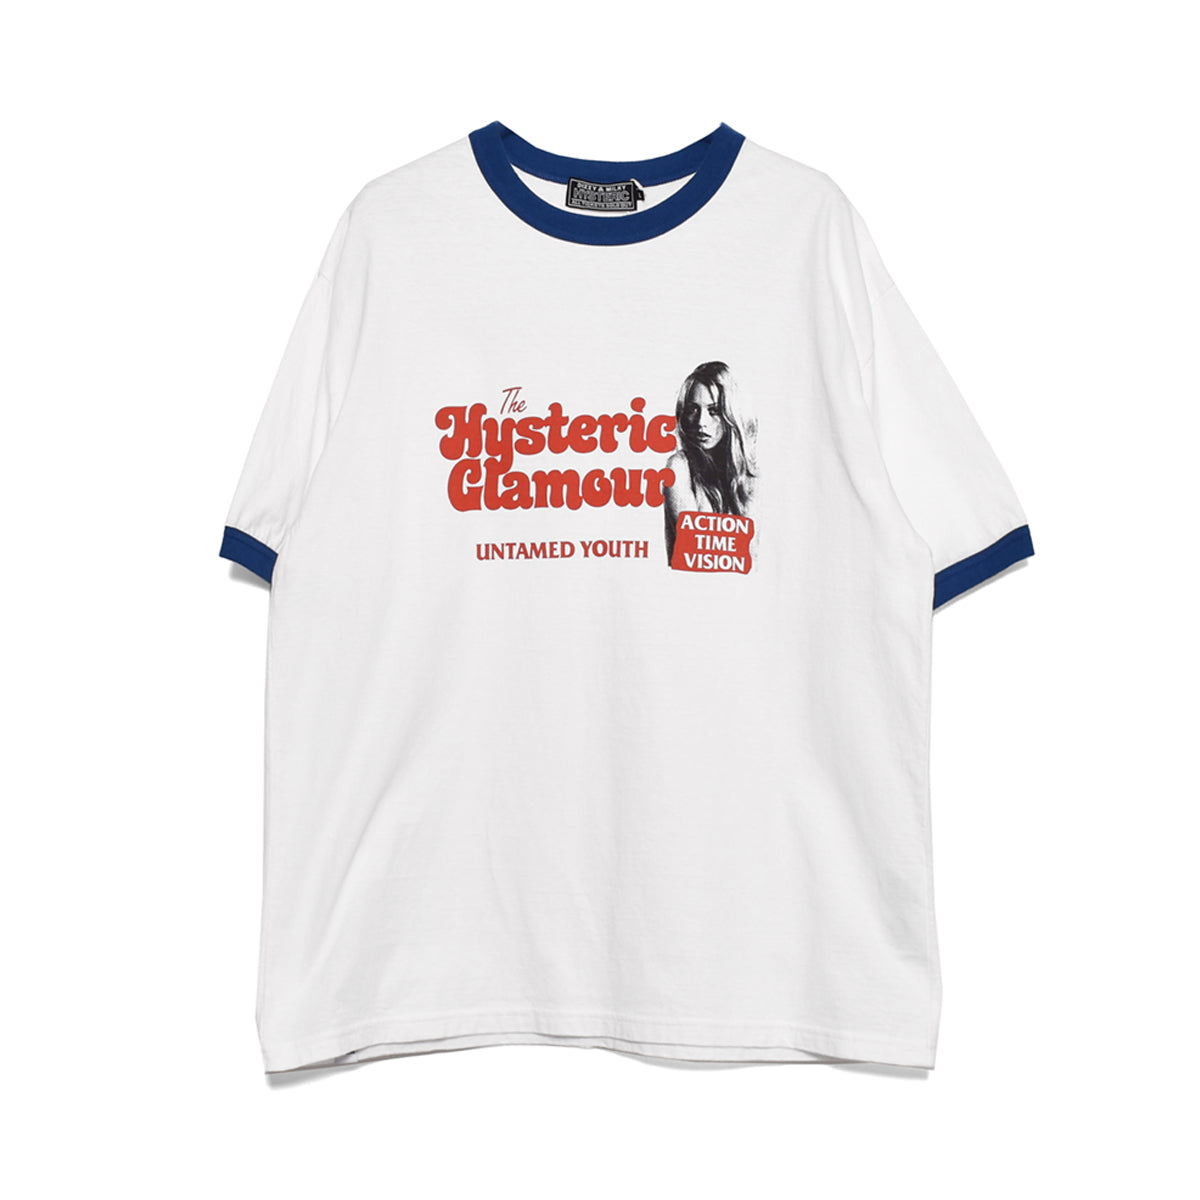 HYSTERIC GLAMOUR]UNTAMED YOUTH Tシャツ/WHITE×BLUE(02231CT17) – R&Co.